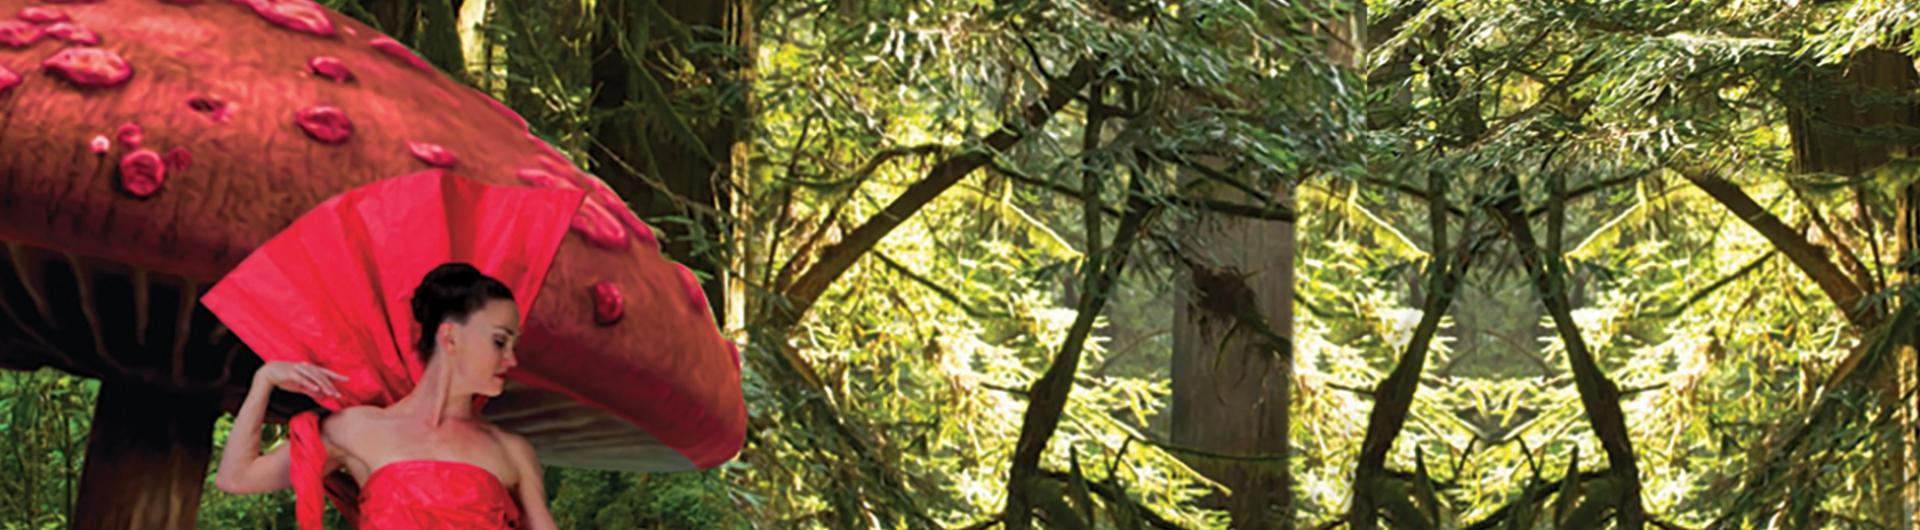 A member of MOMIX in a red dress standing in a forest.